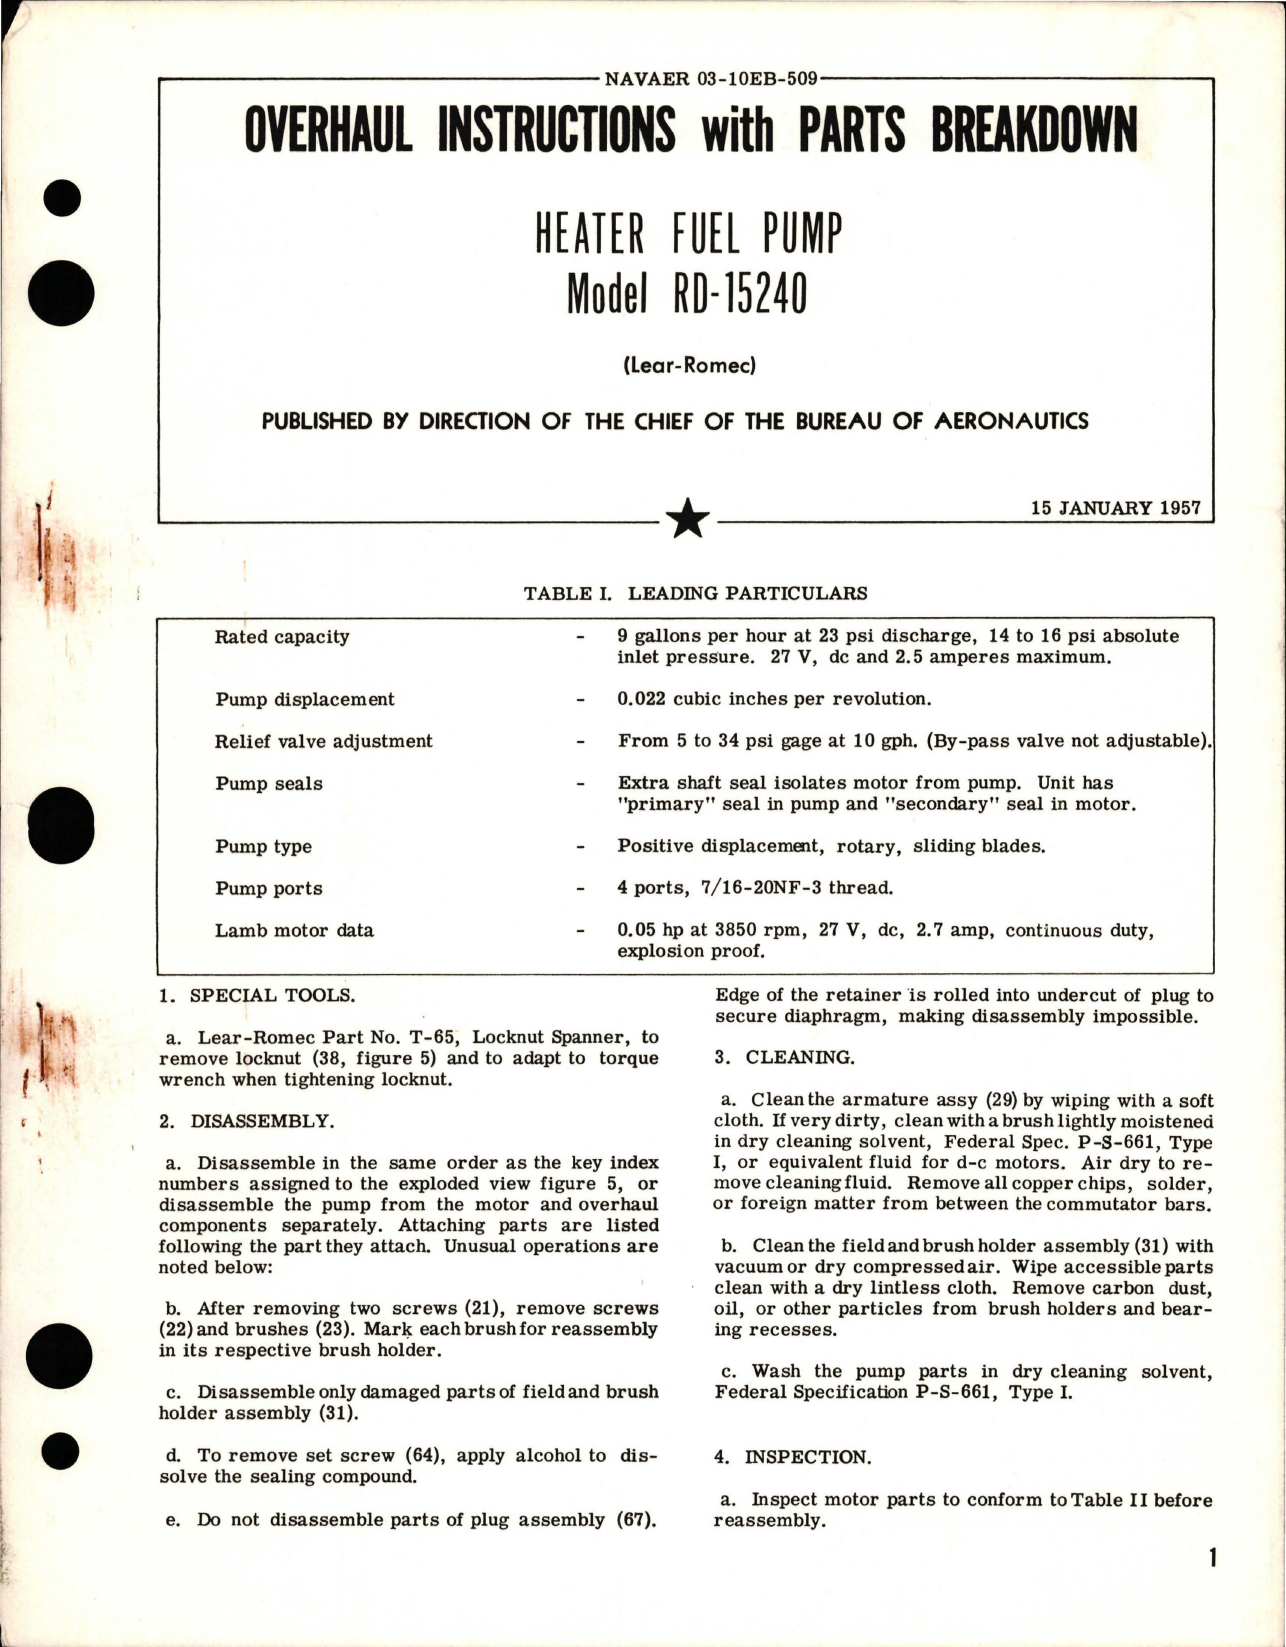 Sample page 1 from AirCorps Library document: Overhaul Instructions with Parts Breakdown for Heater Fuel Pump - Model RD-15240